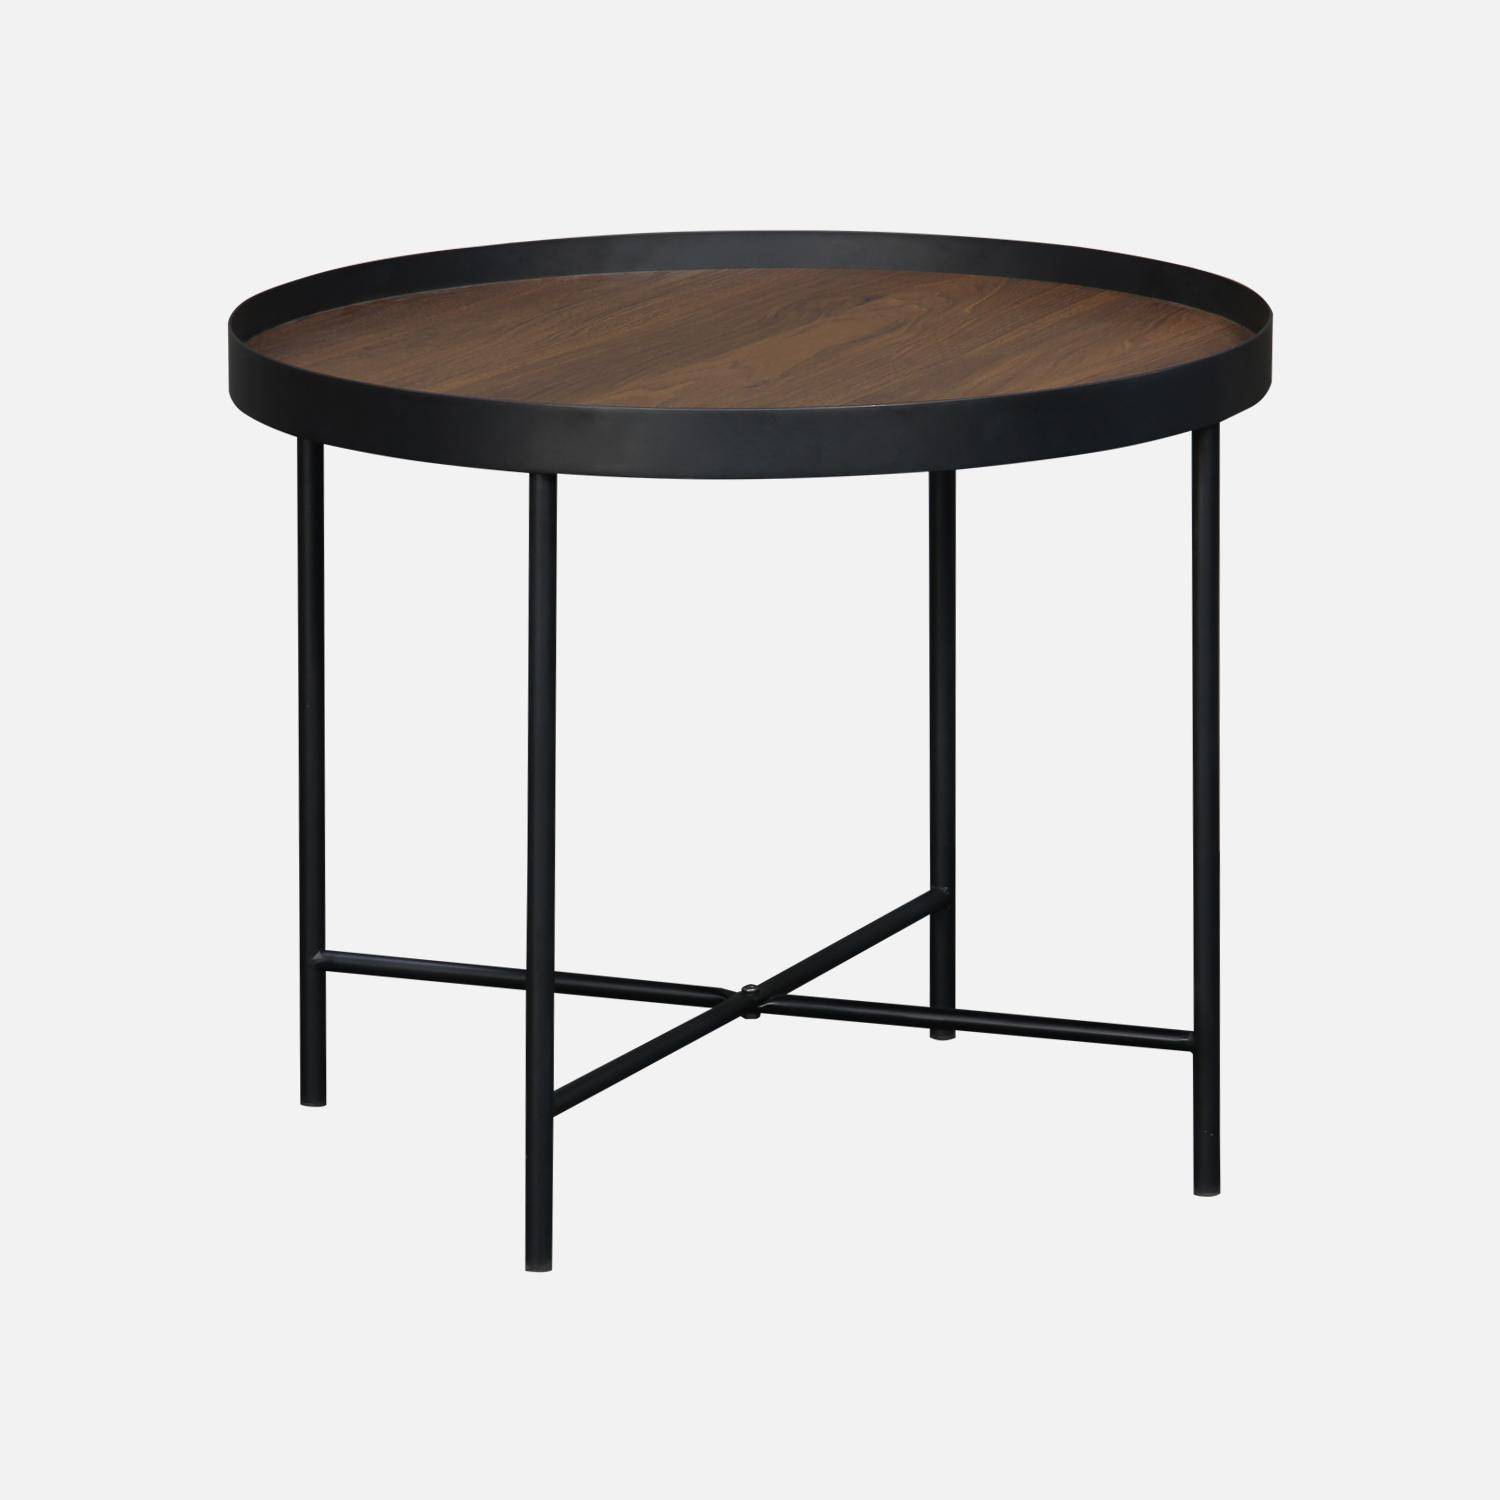 Set of 2 practical round nesting tables in walnut-effect MDF with black legs,sweeek,Photo4